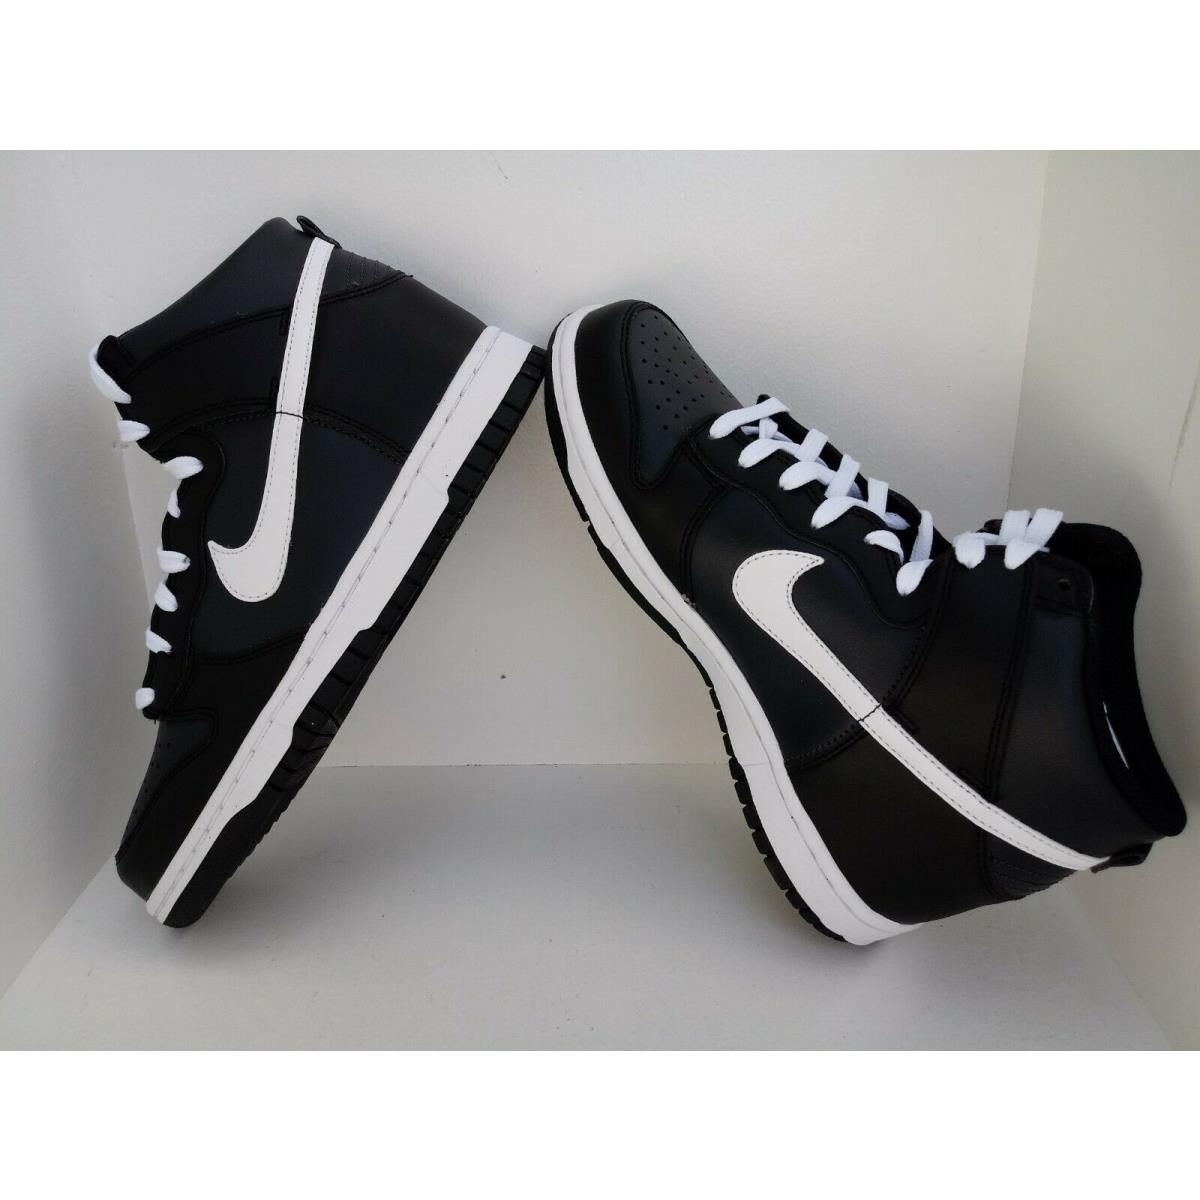 Nike shoes Dunk High - Anthracite/White-Black 6